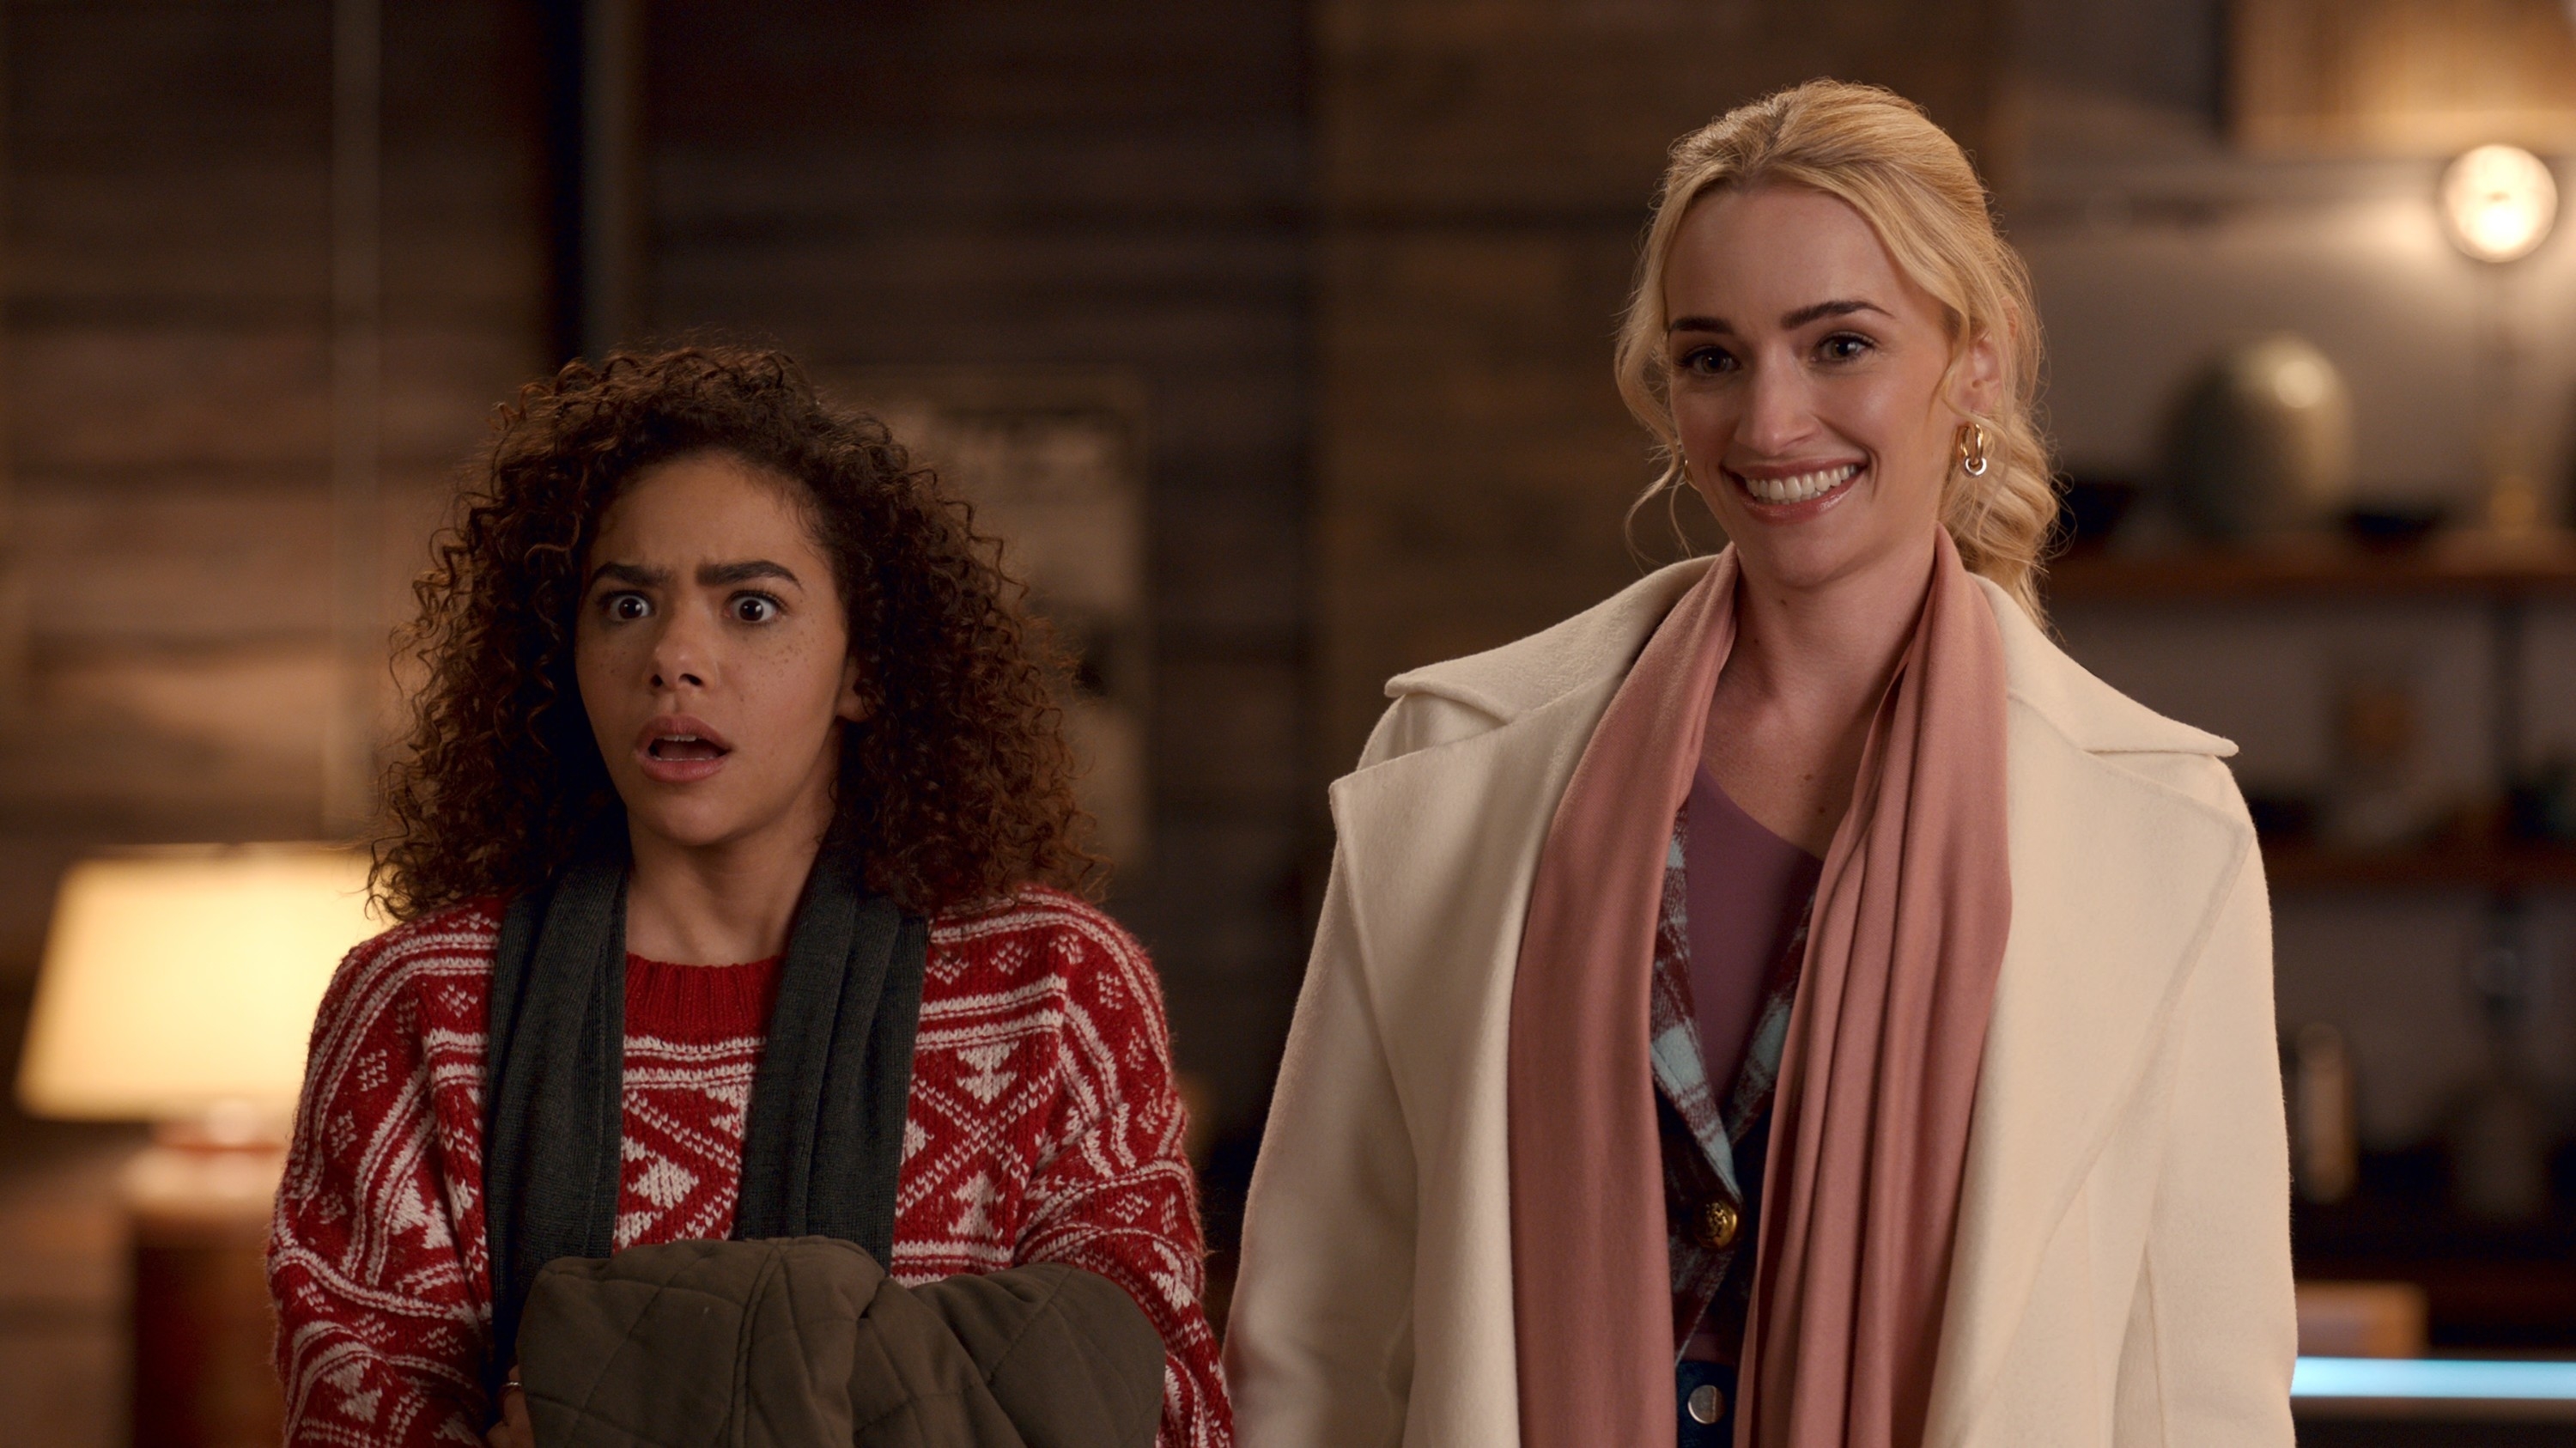 Two women on screen, one wearing a sweater and the other in a coat, expressing surprise